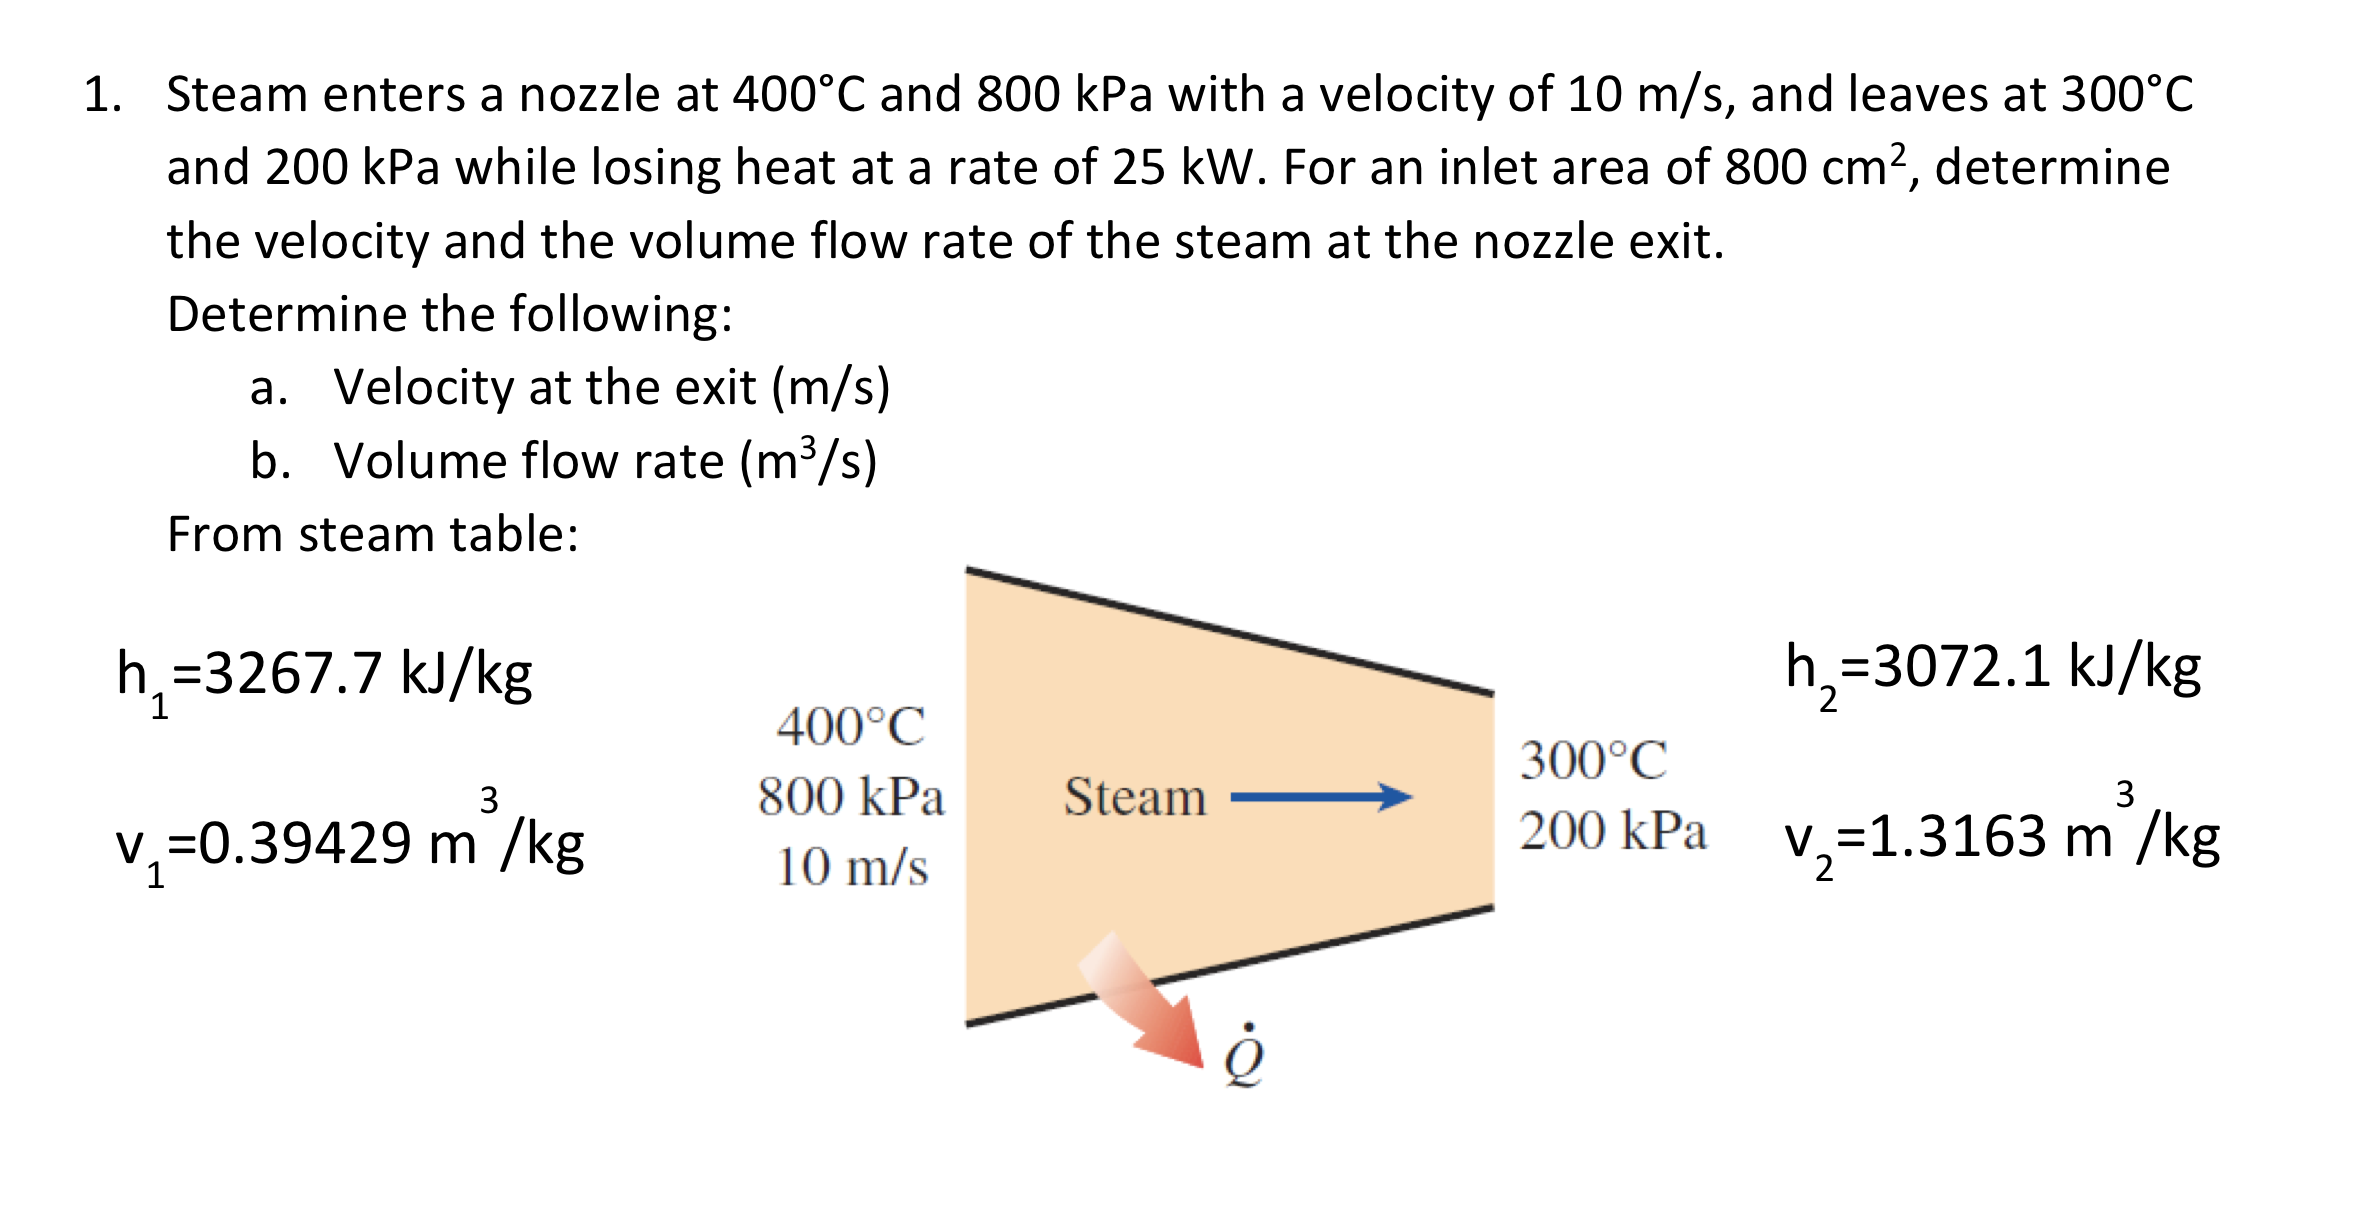 1. Steam enters a nozzle at 400°C and 800 kPa with a velocity of 10 m/s, and leaves at 300°C
and 200 kPa while losing heat at a rate of 25 kW. For an inlet area of 800 cm2, determine
the velocity and the volume flow rate of the steam at the nozzle exit.
Determine the following:
a. Velocity at the exit (m/s)
b. Volume flow rate (m³/s)
From steam table:
h =3267.7 kJ/kg
h,=3072.1 kJ/kg
400°C
300°C
3
800 kPa
Steam
3
v,=0.39429 m /kg
200 kPa
v,=1.3163 m /kg
10 m/s
